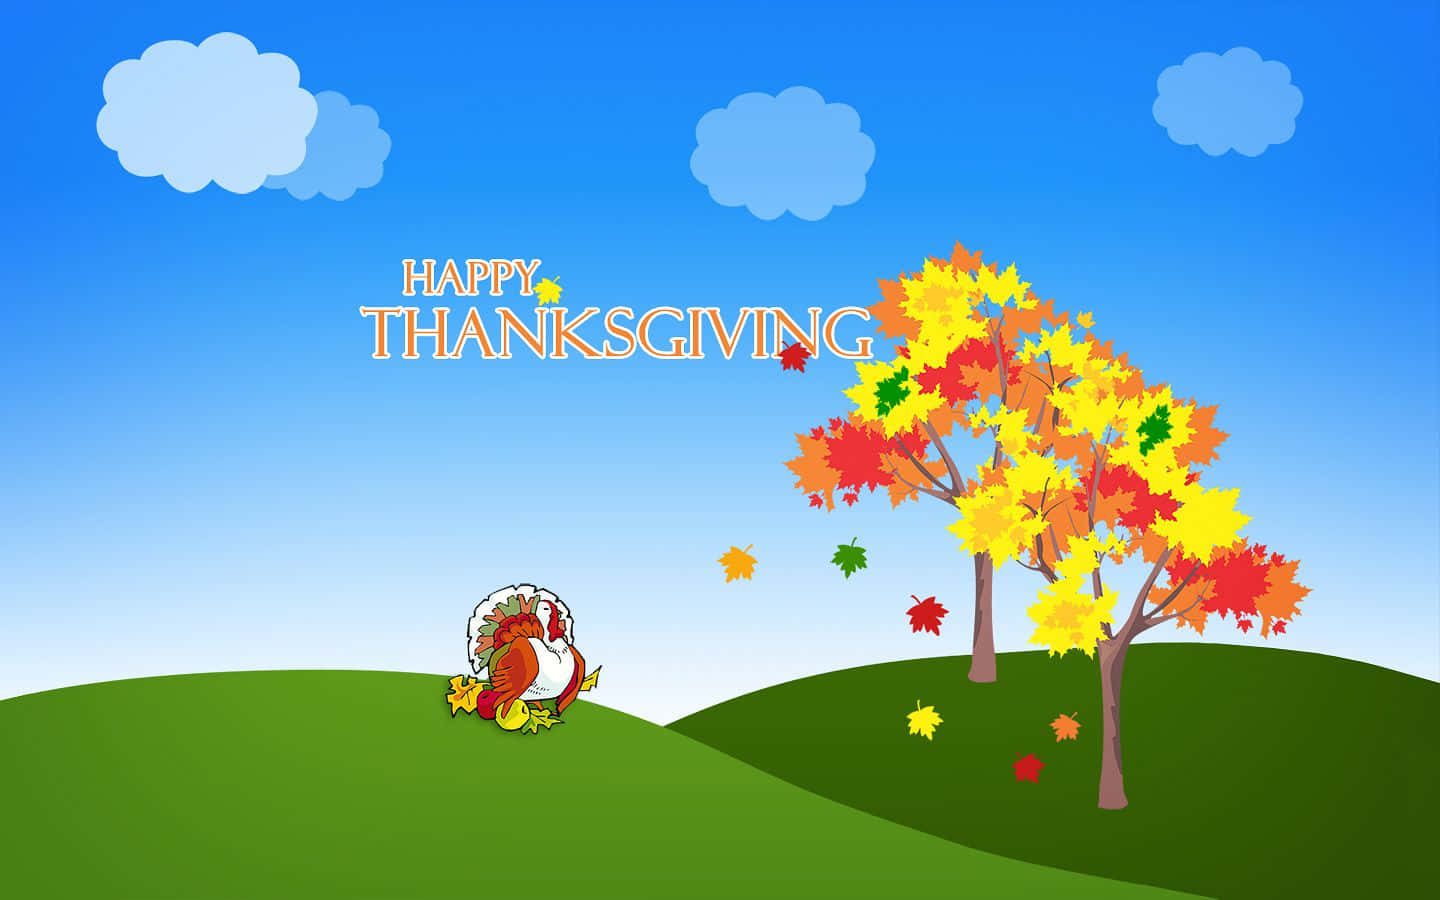 Have A Funny Thanksgiving Holiday With Friends And Family! Wallpaper